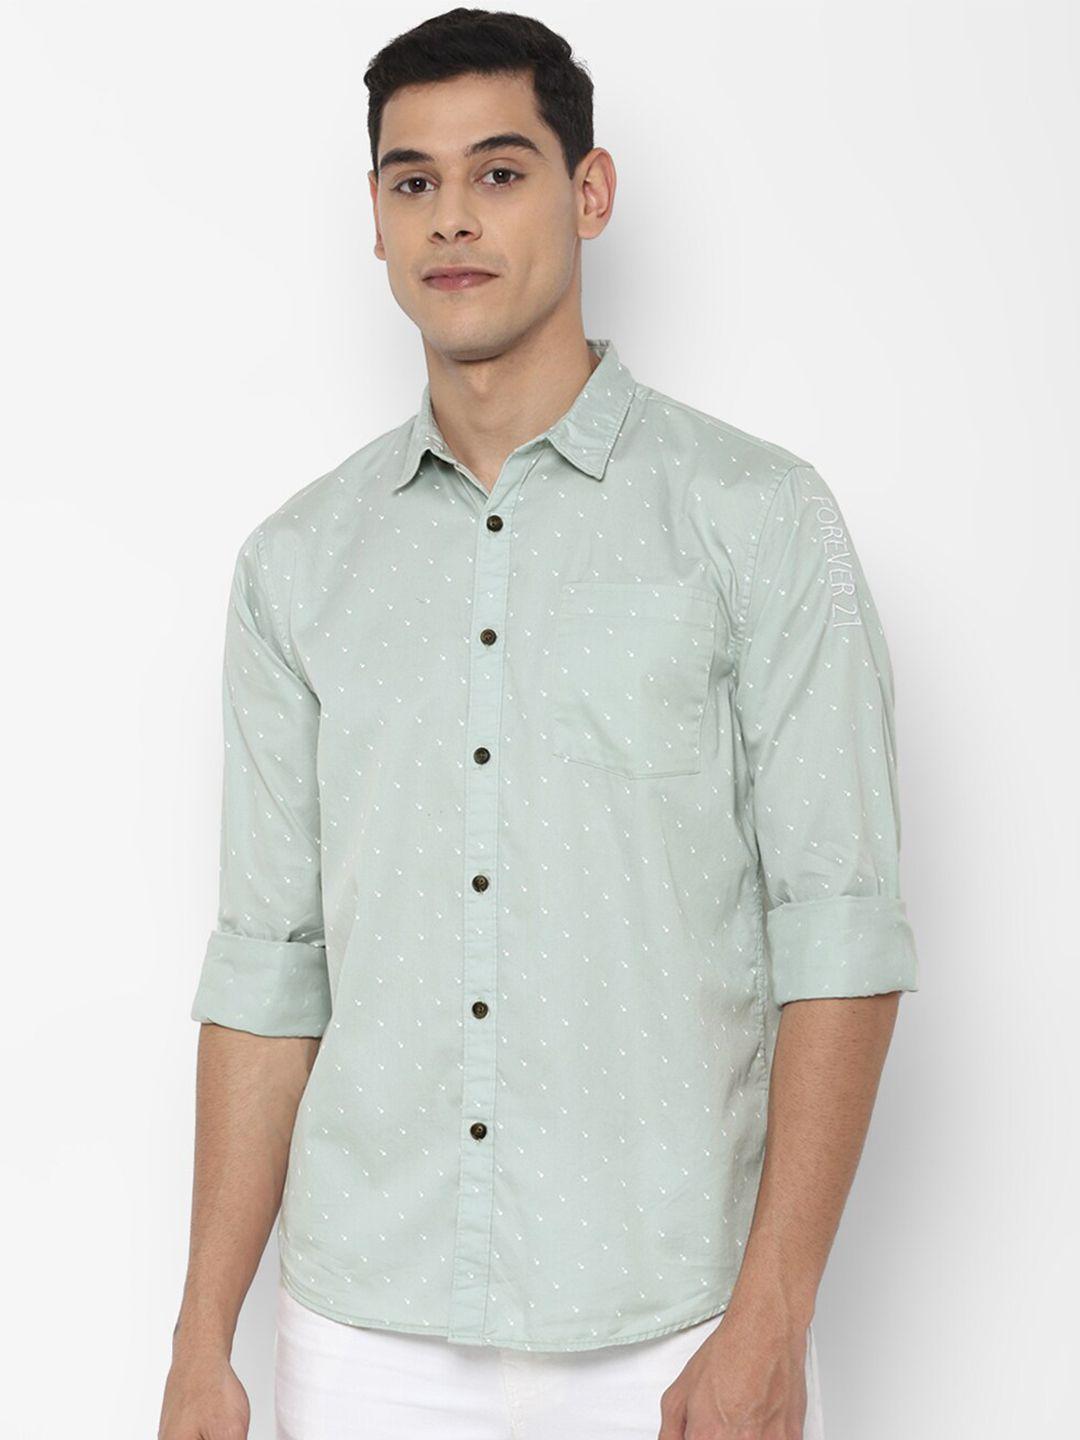 forever-21-men-green-slim-fit-opaque-printed-cotton-casual-shirt